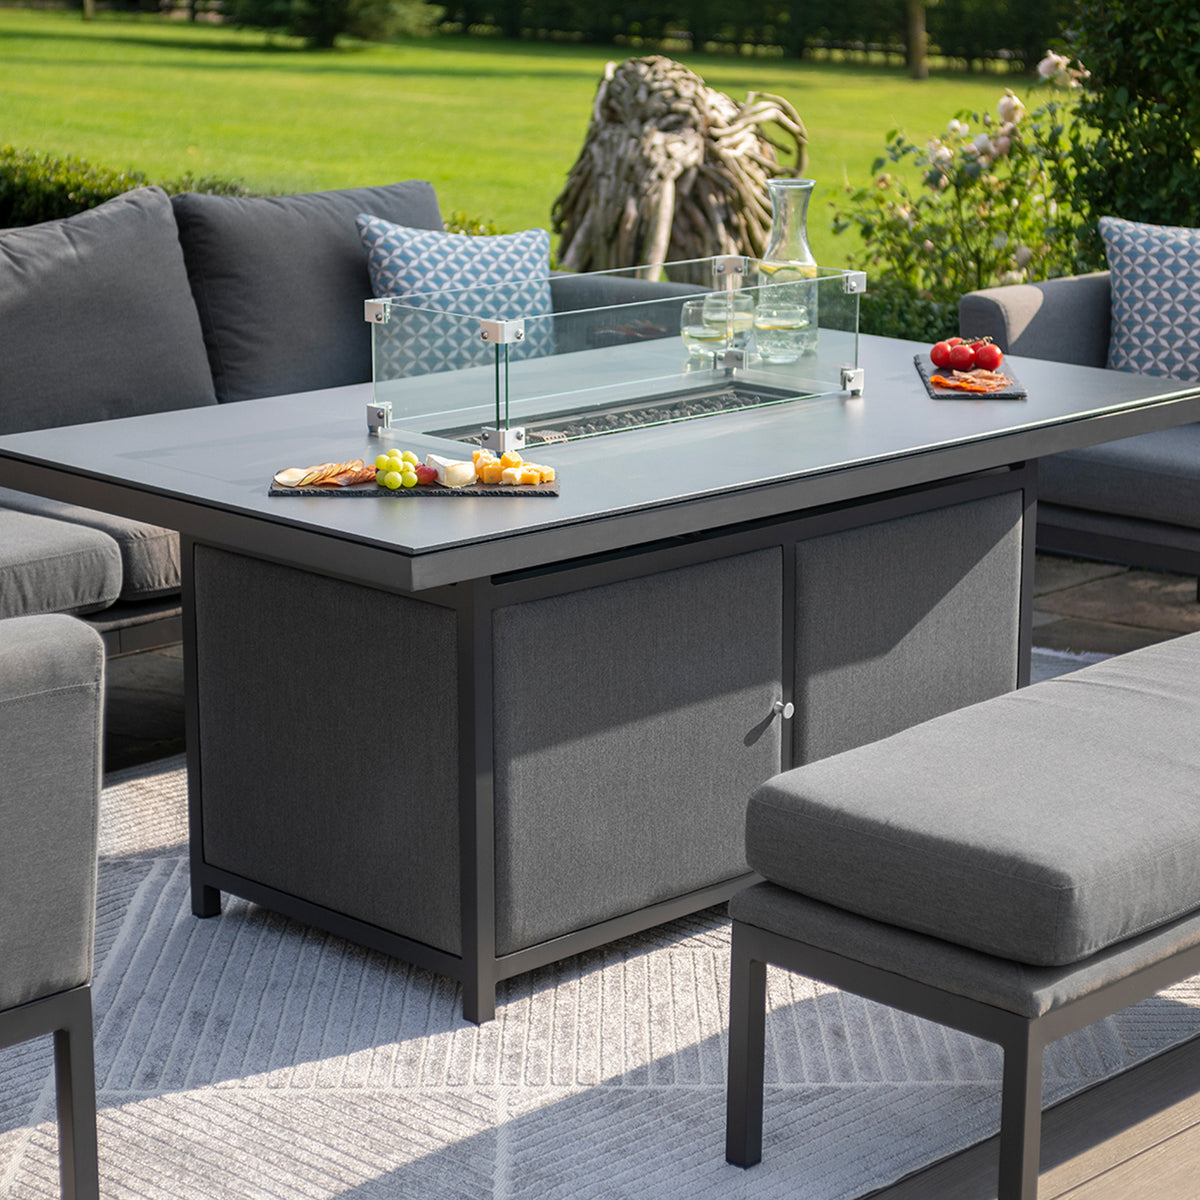 Maze Pulse Flanelle Grey 3 Seat Sofa Dining Set with Fire Pit from Roseland Furniture